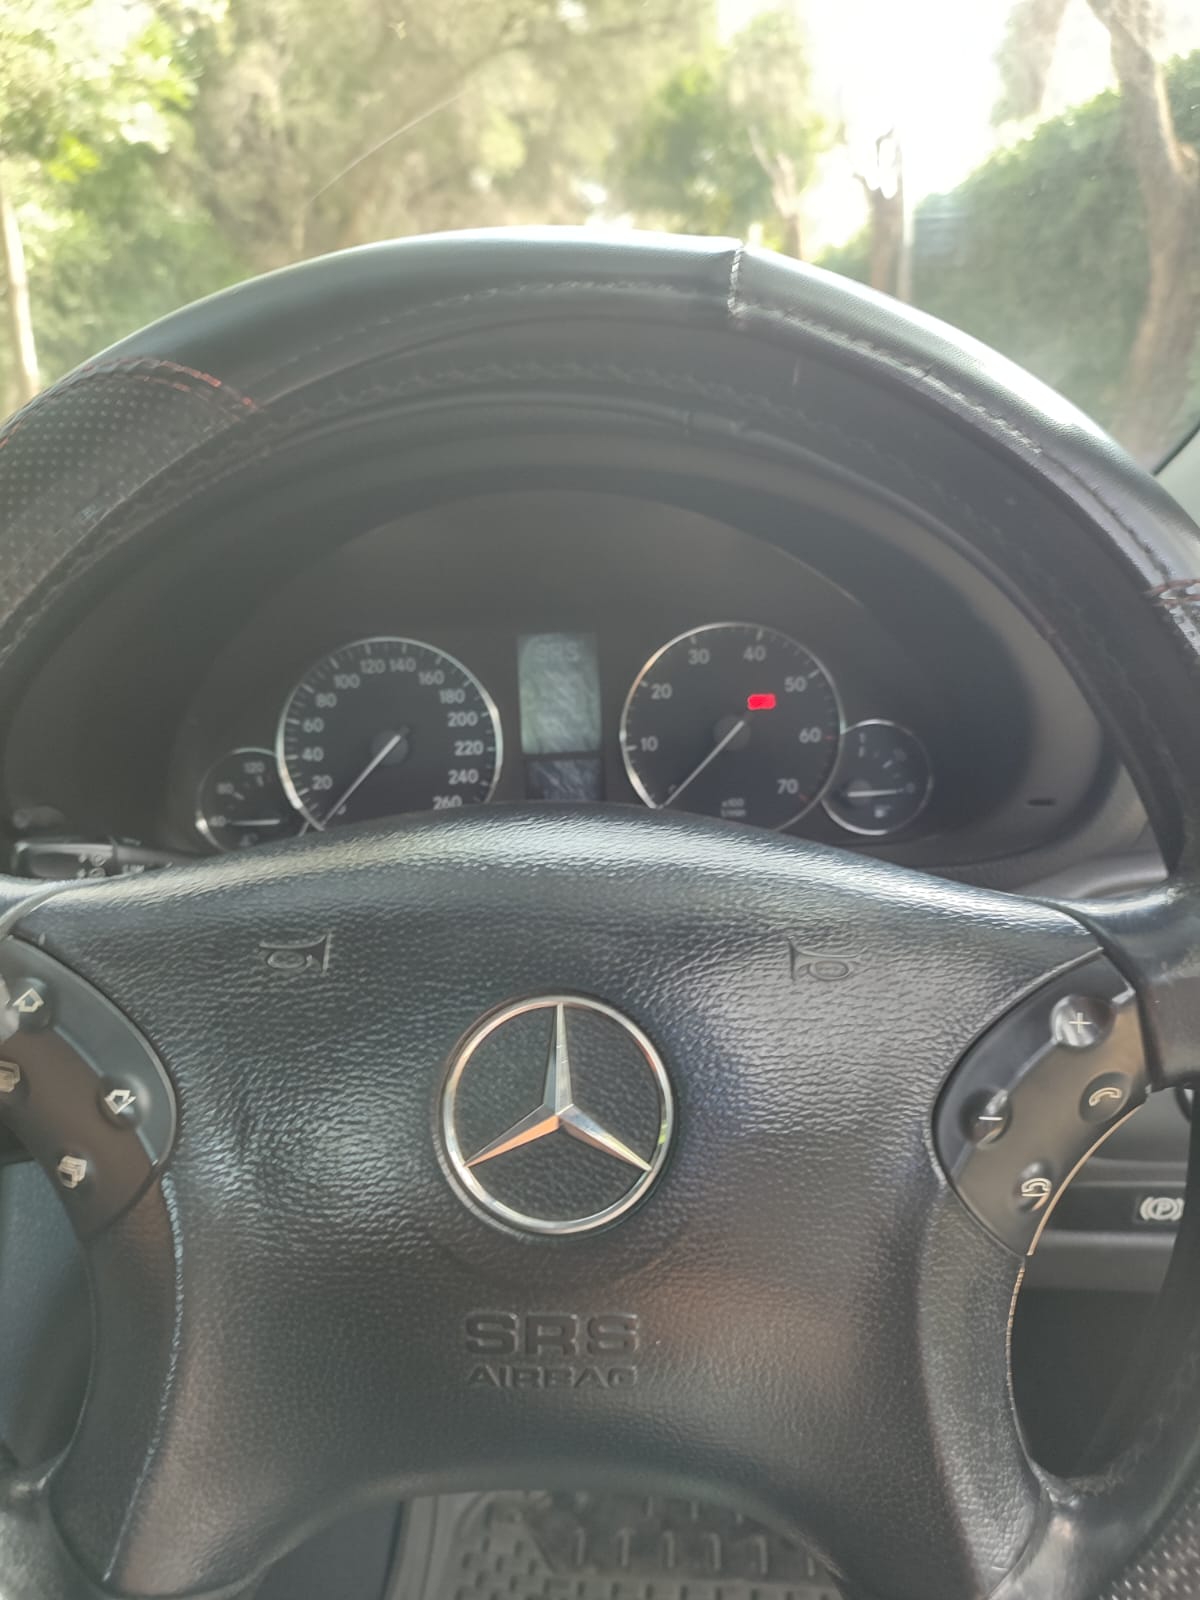 Mercedes Benz C200 Clean You Pay 30% DEPOSIT Trade in OK EXCLUSIVE